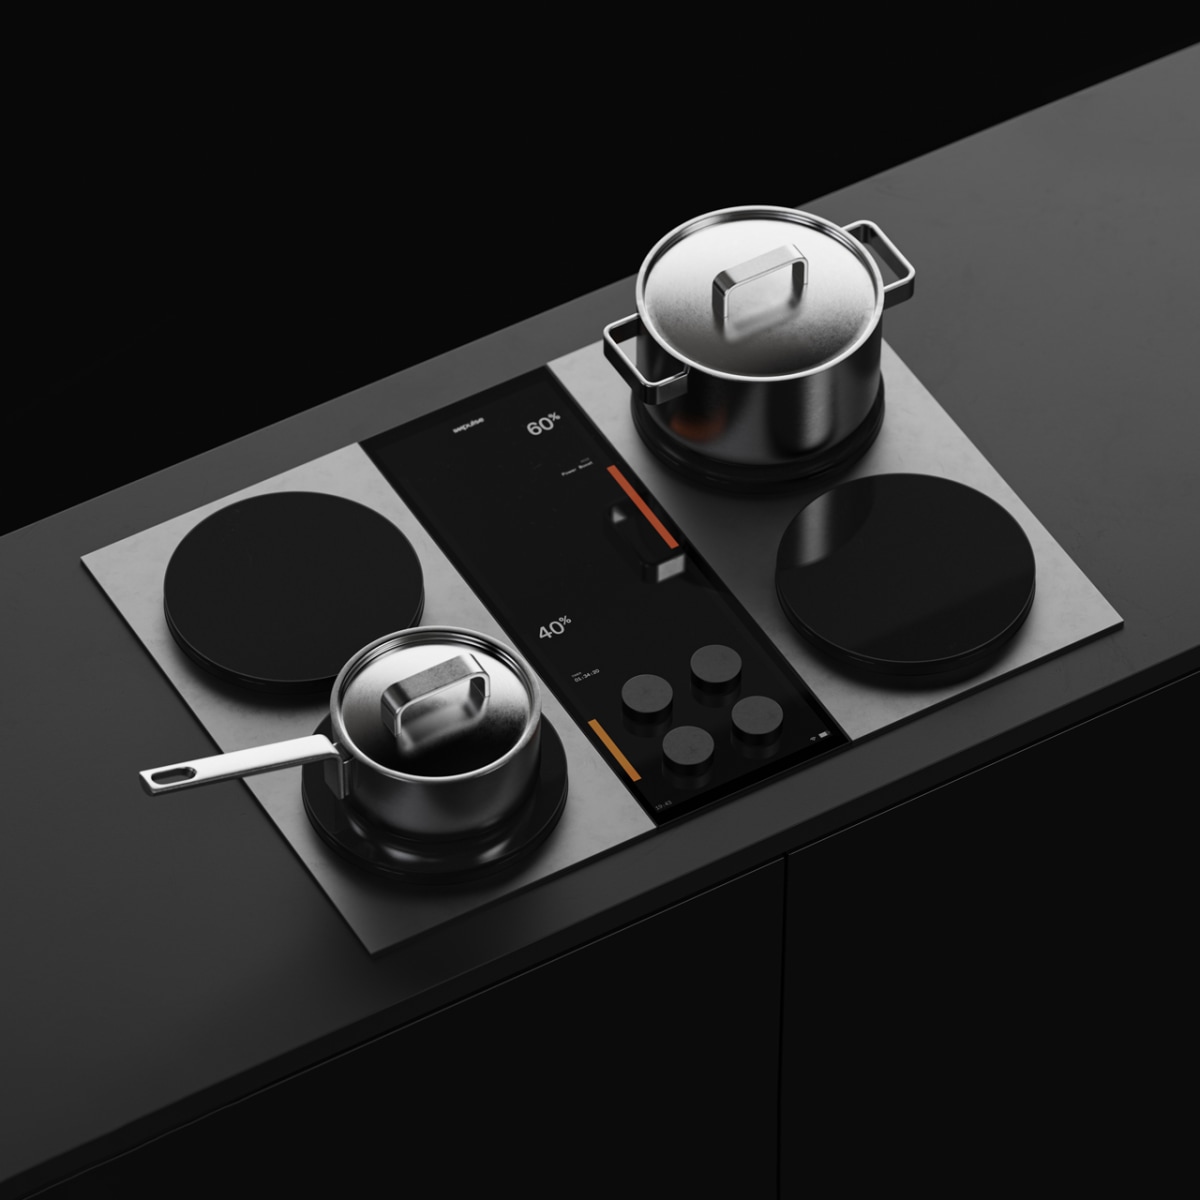 Induction cooktop vs. gas stove: Which boils water faster?